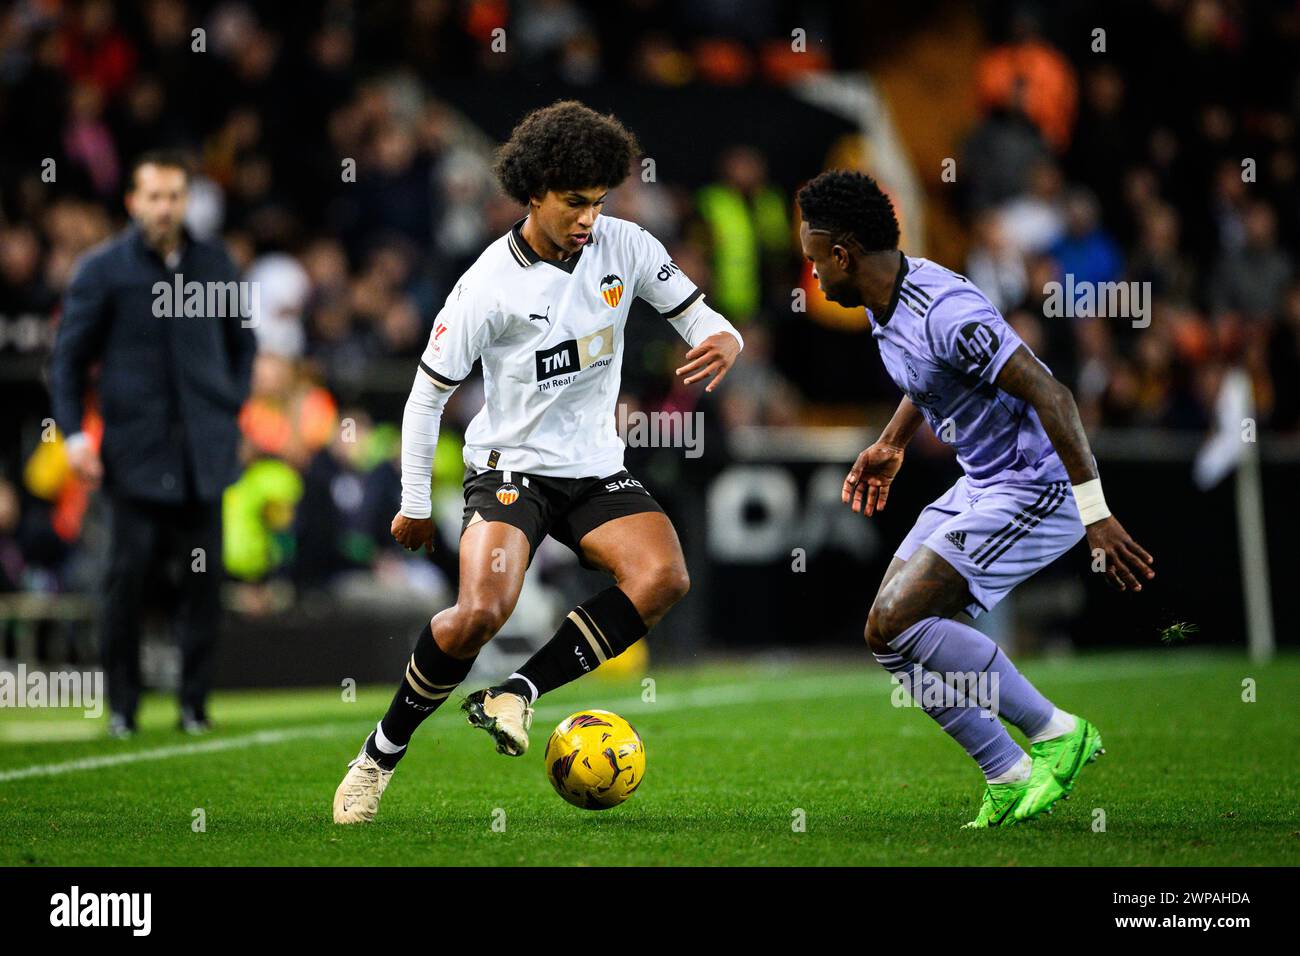 Valencia CF's Spanish-Dominican player Peter Federico trying to dribble past Real Madrid Vinicius with coach Ruben Baraja looking on in the background Stock Photo